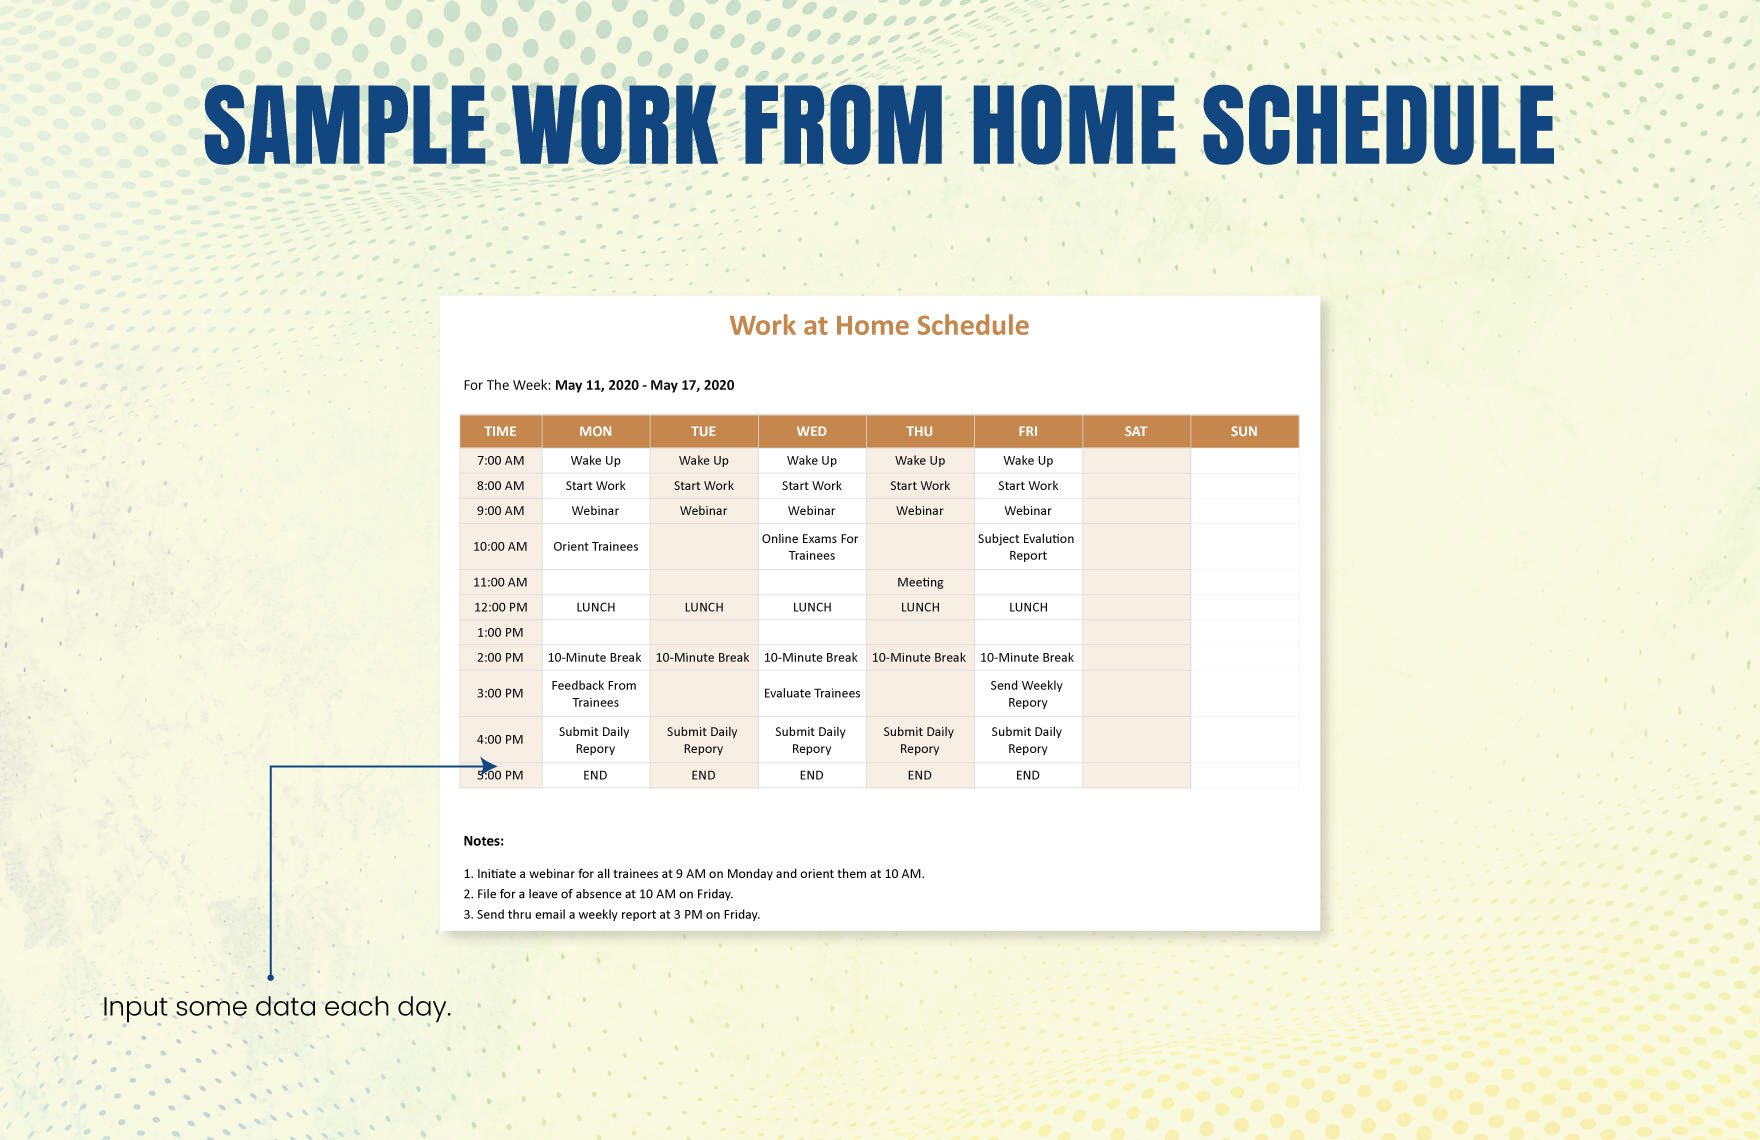 Work at Home Schedule Template